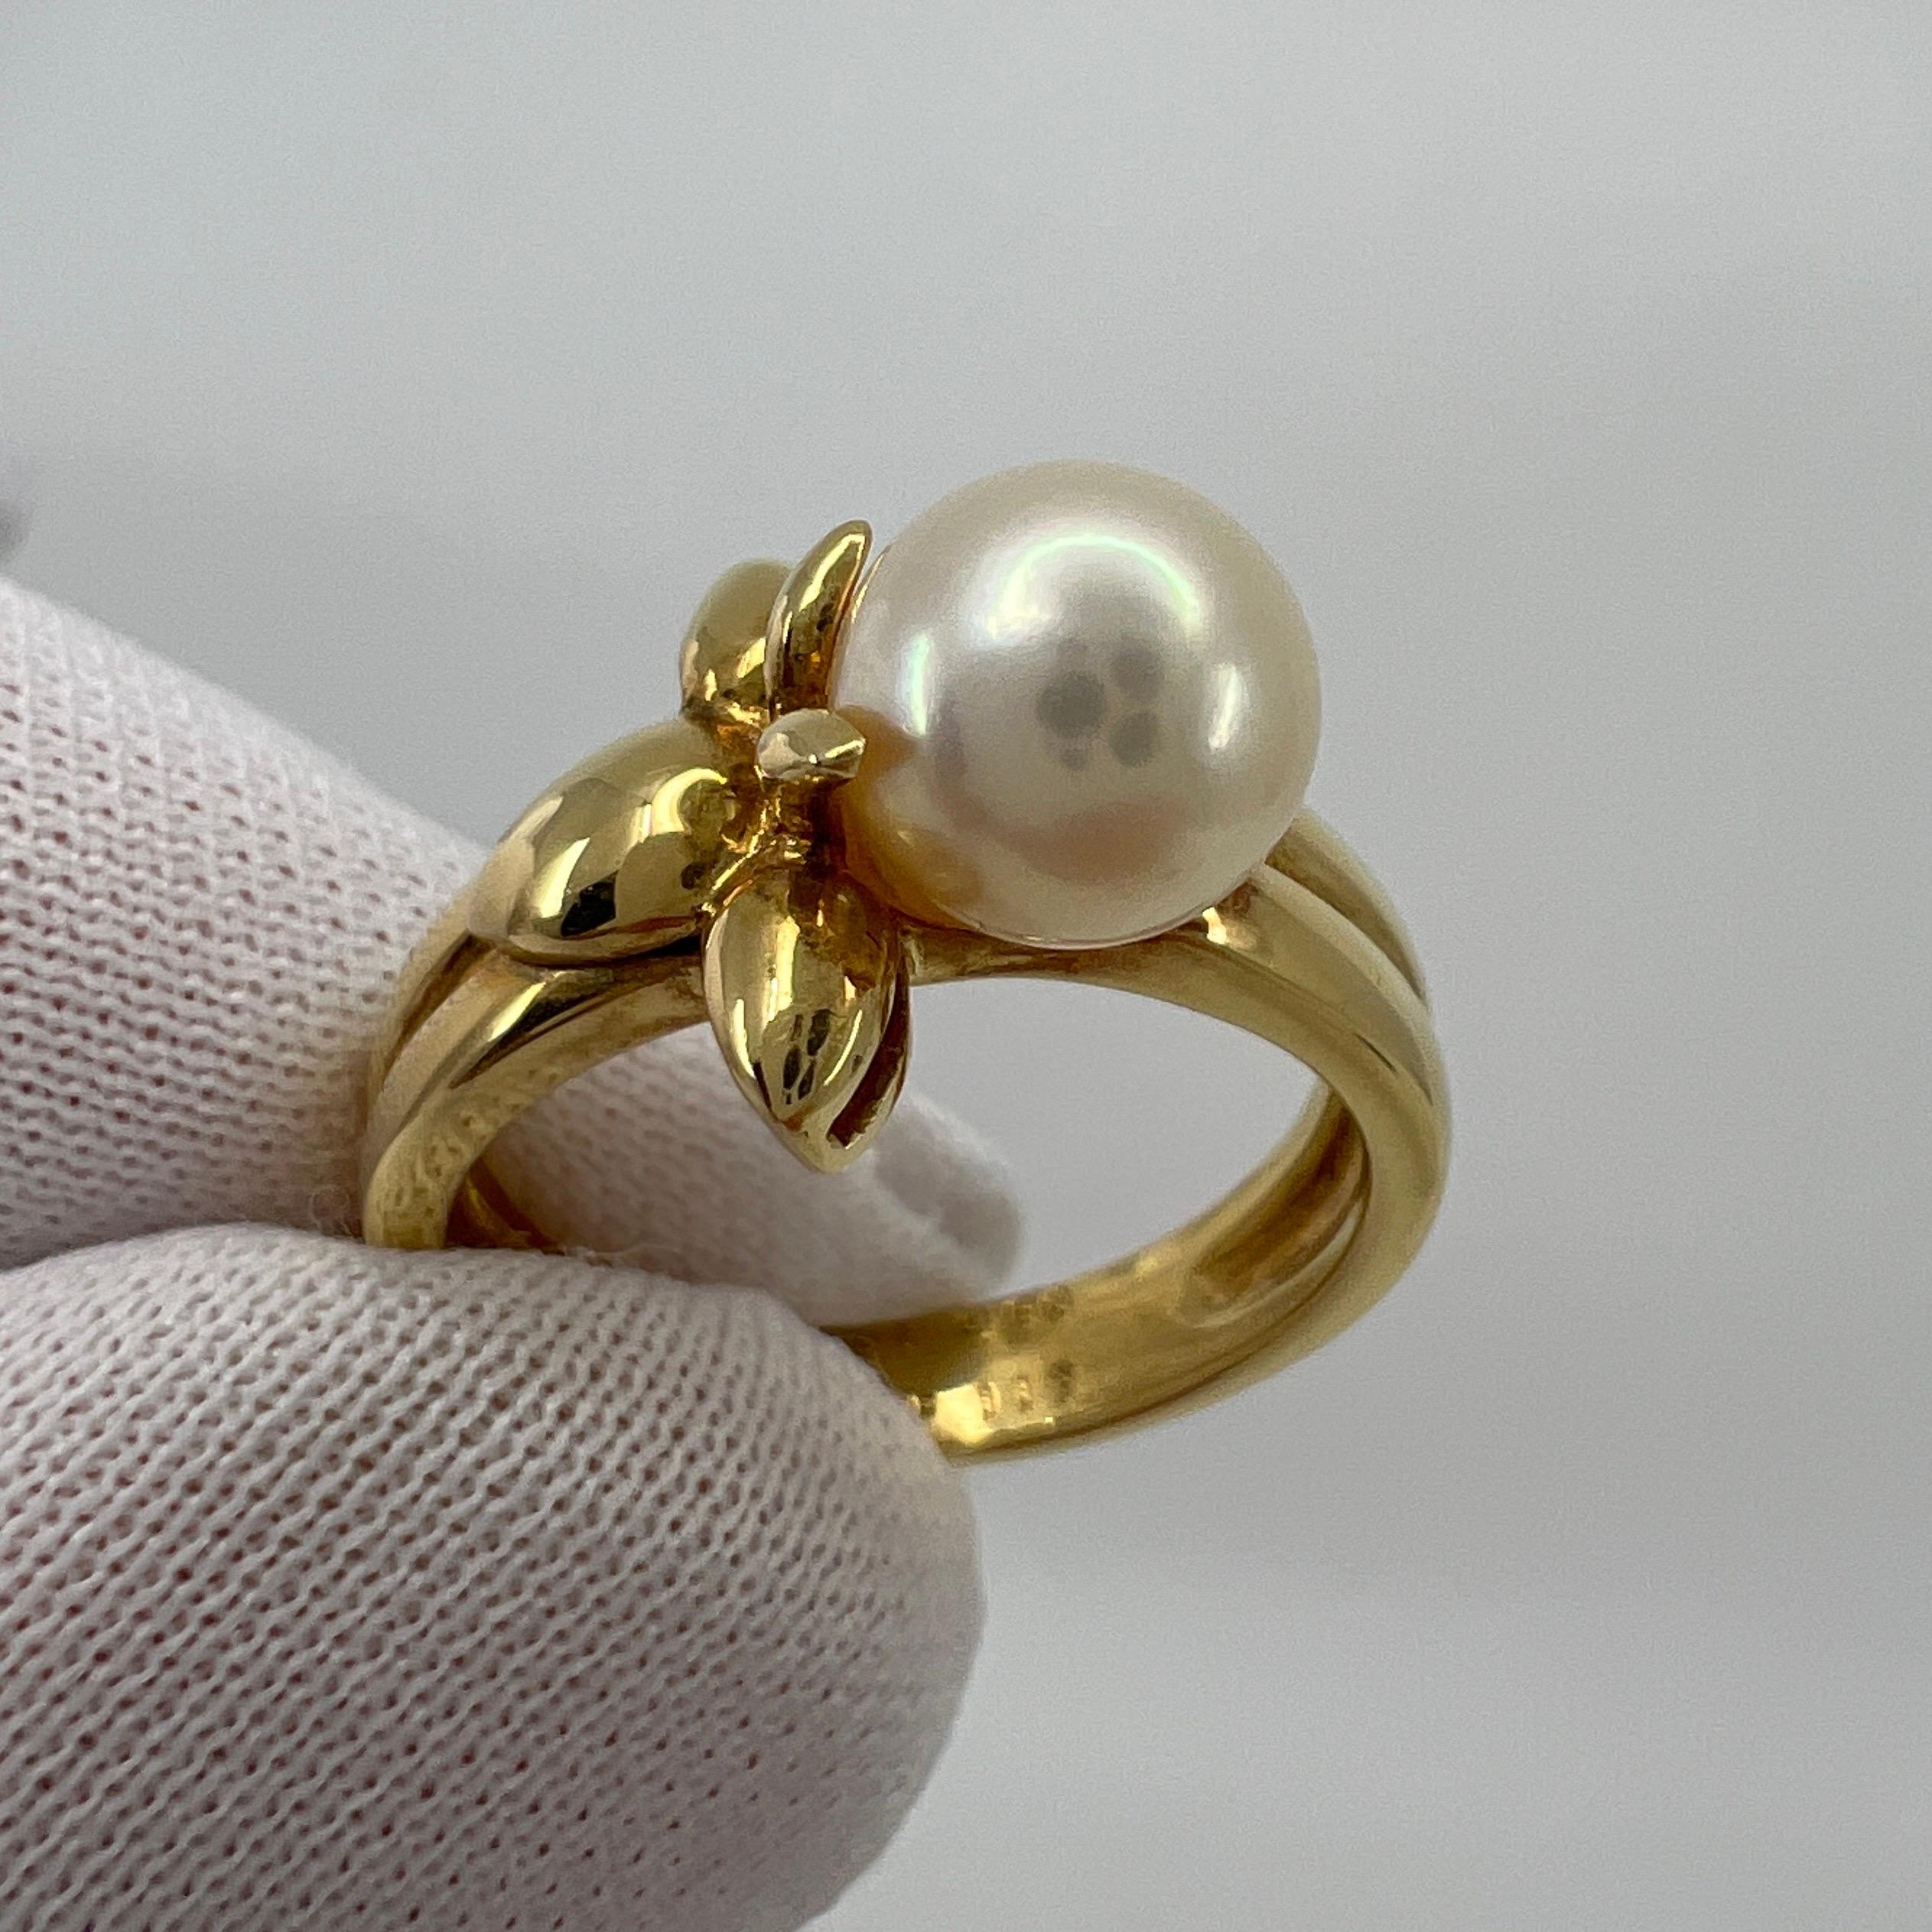 Round Cut Rare Vintage Van Cleef & Arpels Pearl 18k Yellow Gold Flower Ring with Box For Sale